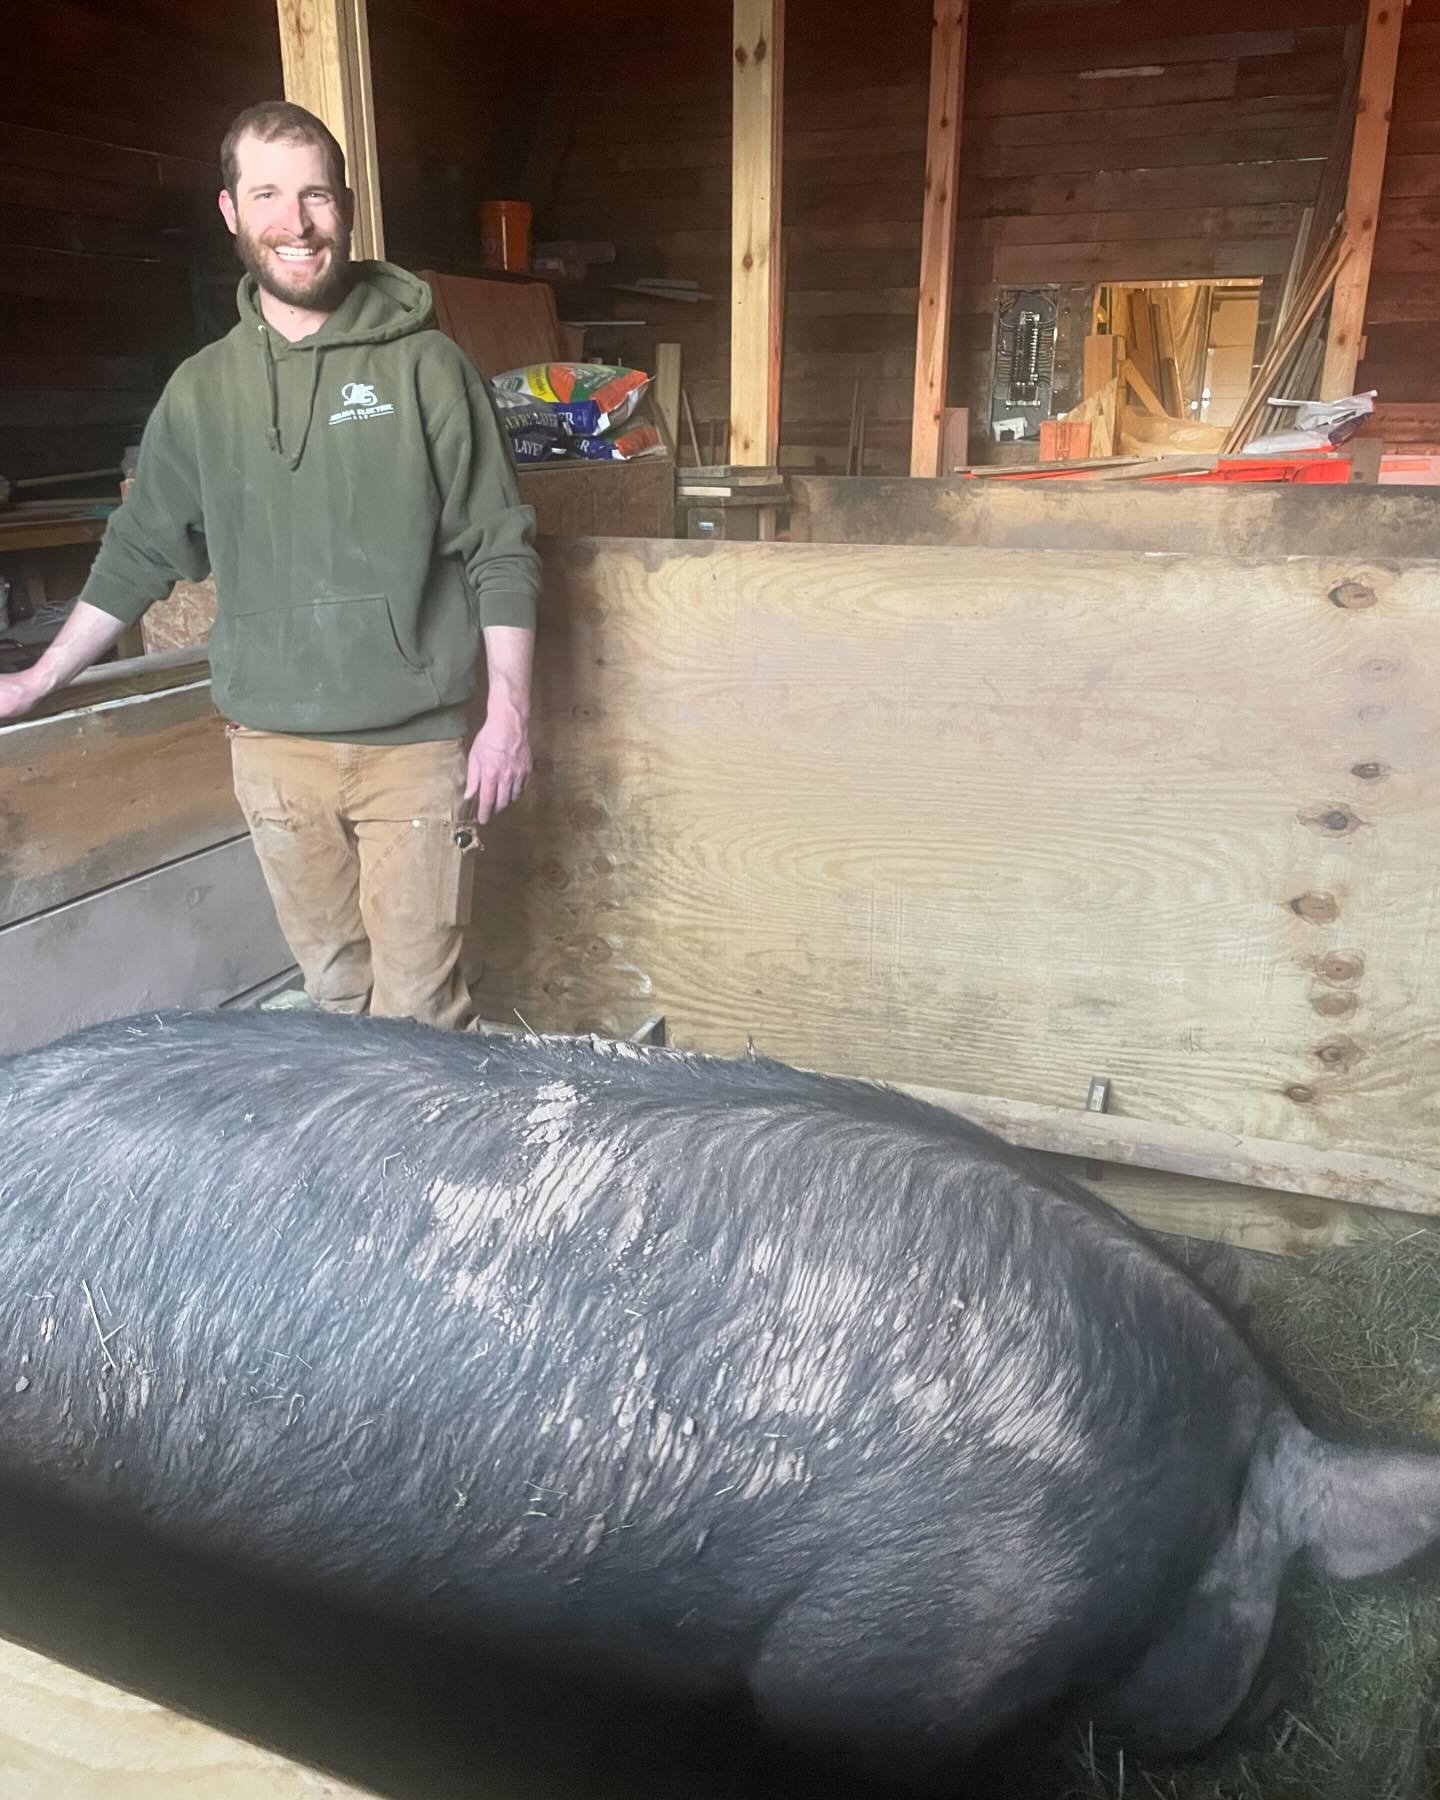 Our sow, Bertha, will be having her piglets today. She started laboring last evening and was able to sleep through her contractions last night, but we&rsquo;re hoping things start progressing soon. It took quite a bit of maneuvering to get her into t